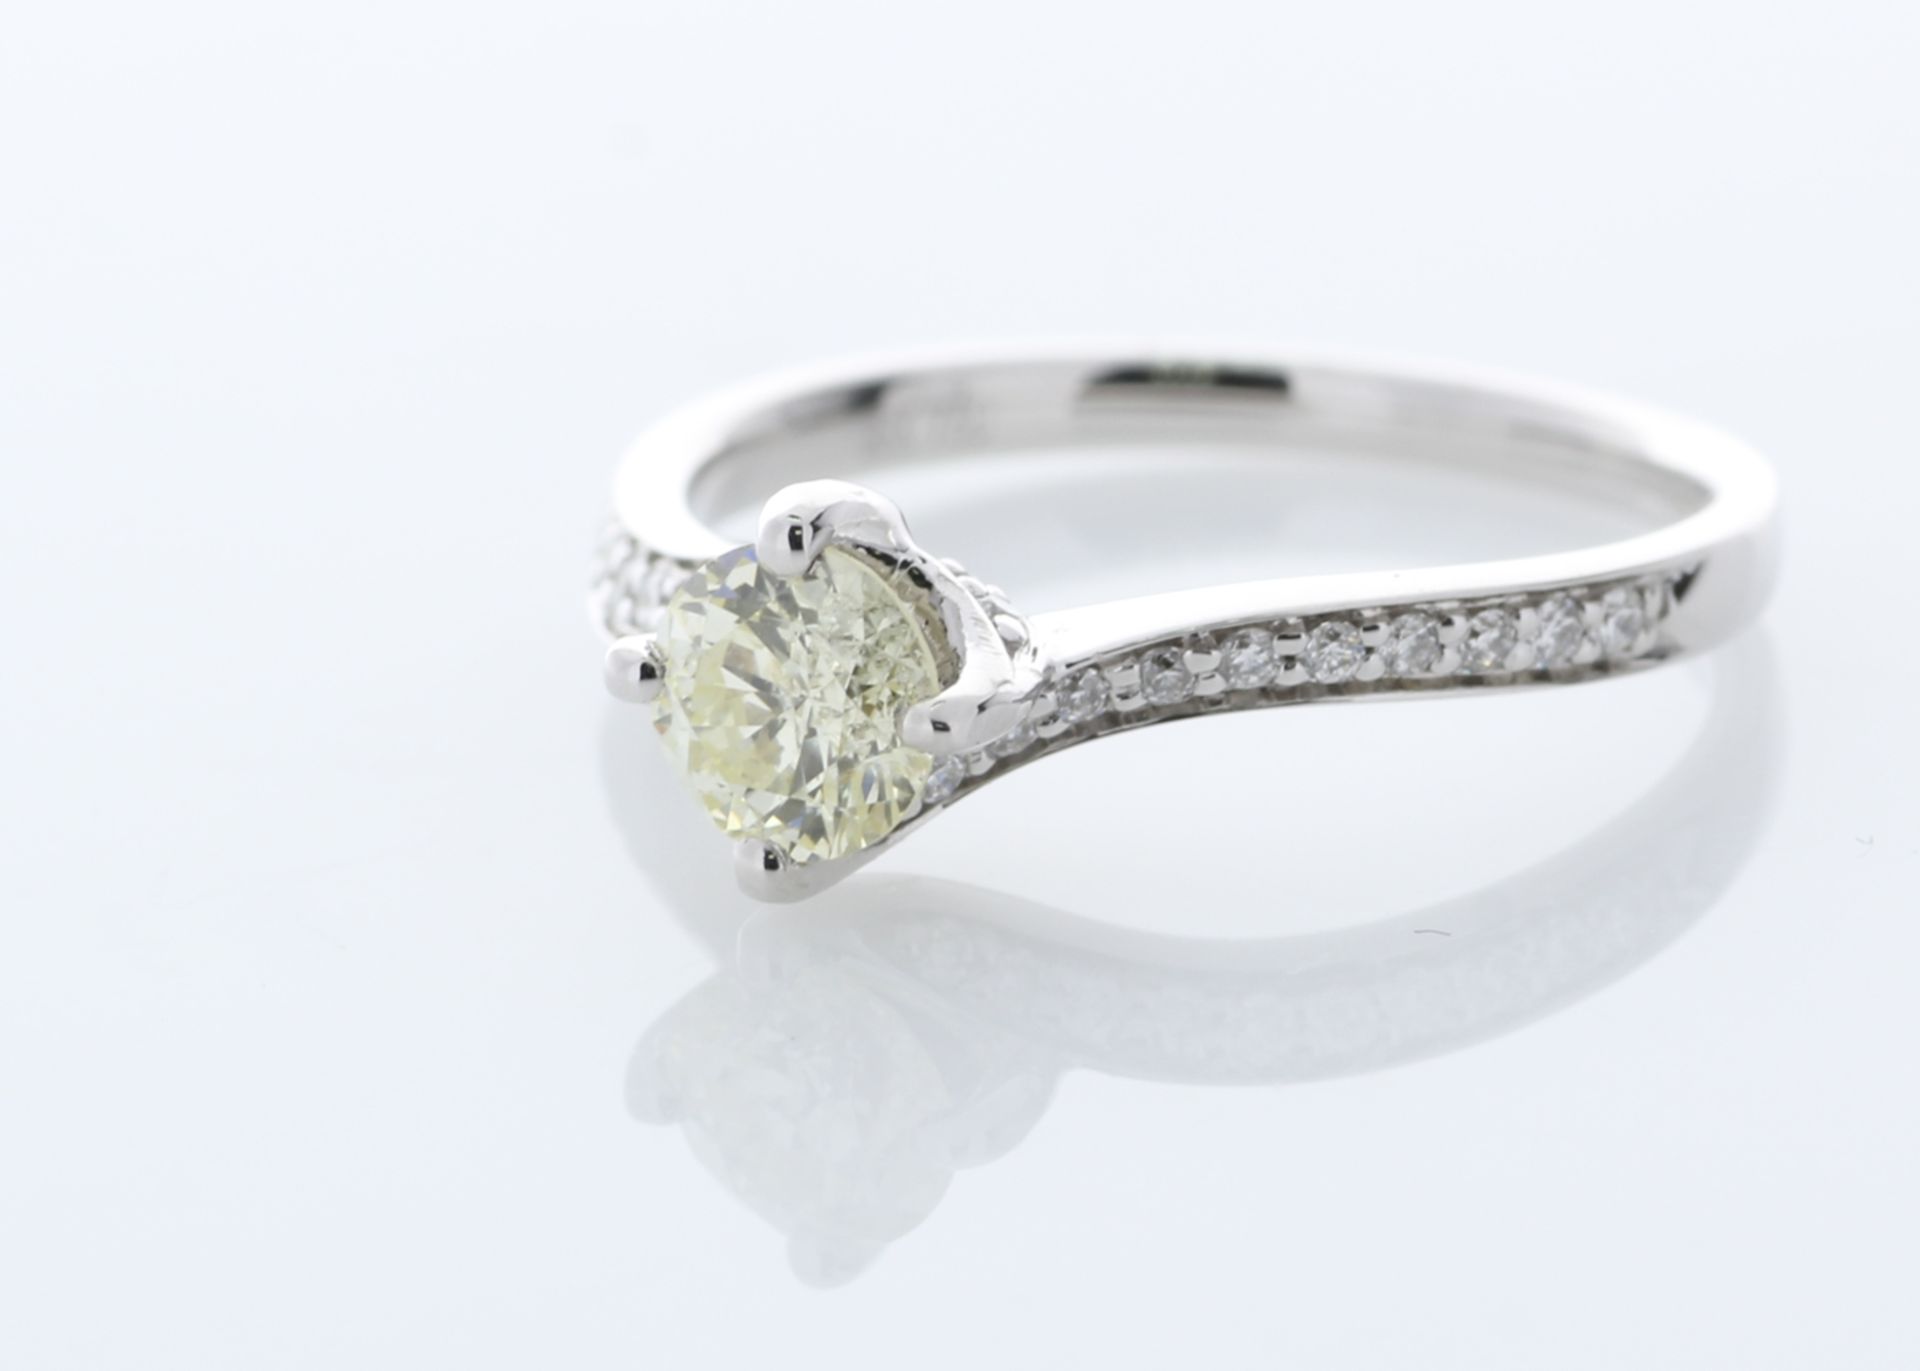 18ct White Gold Single Stone with Diamond set Shoulders Ring (0.57) 0.72 Carats - Image 2 of 6